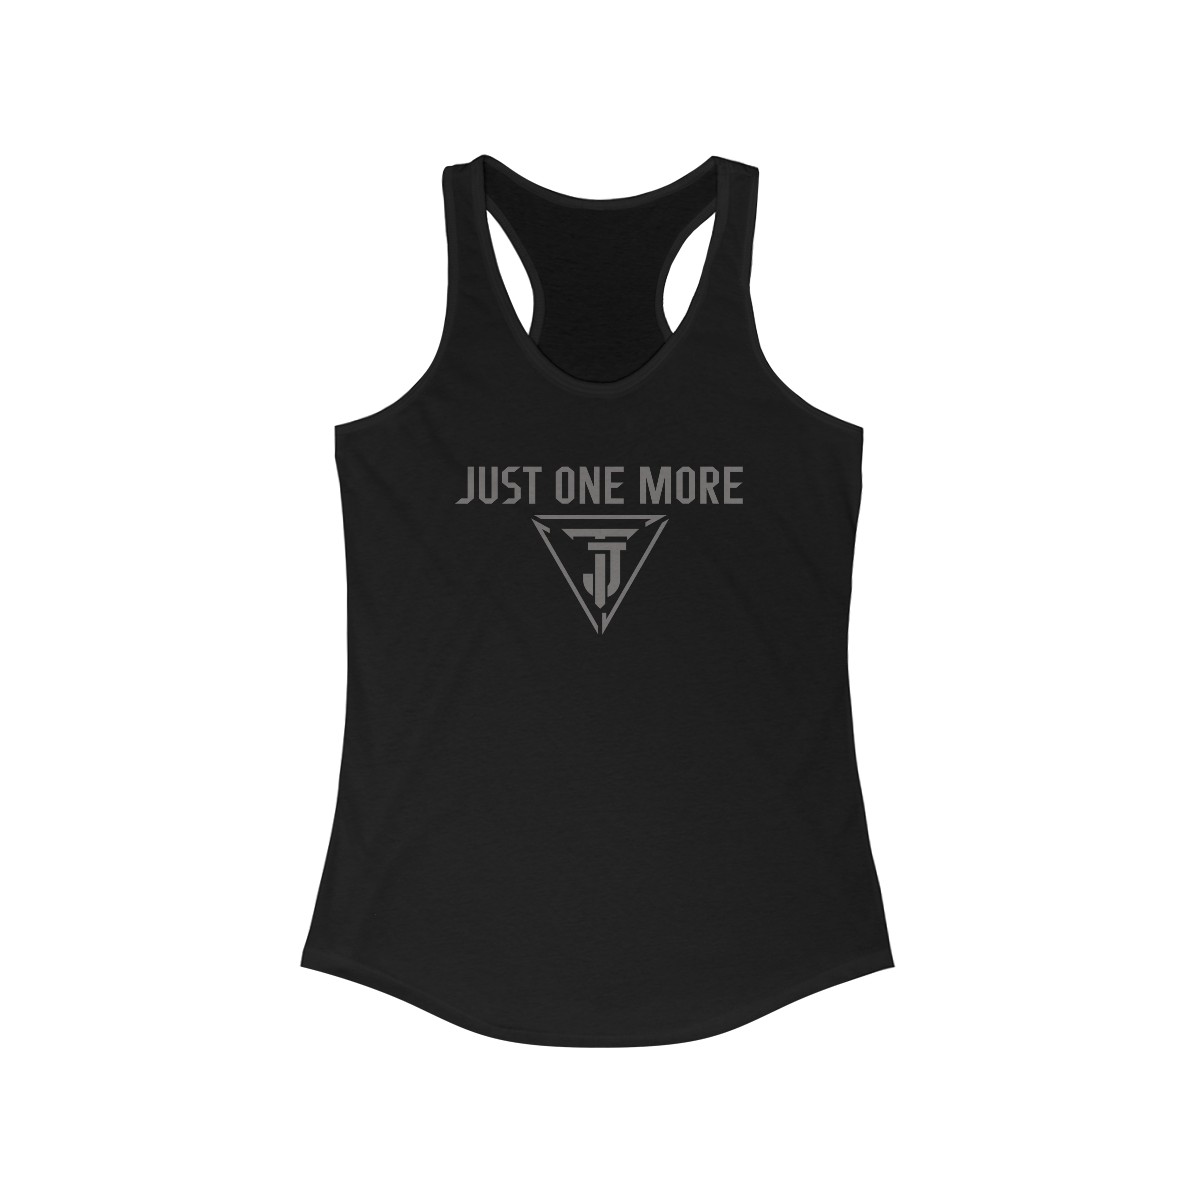 Women's Racerback Tank "Just One More" product main image